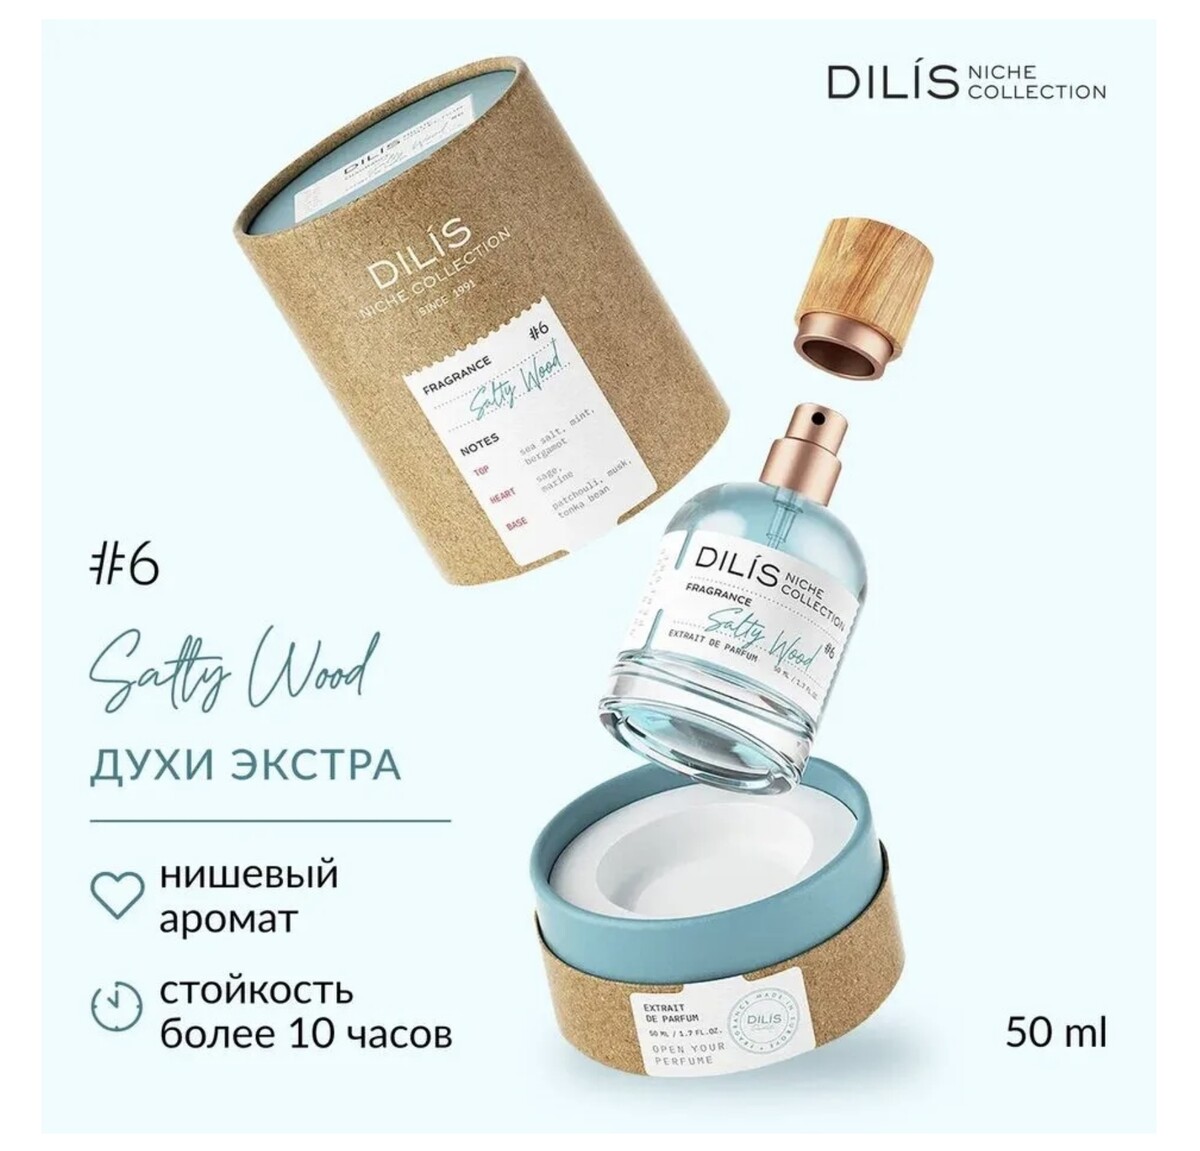 Niche collection духи salty wood 50мл духи женские dilis niche collection